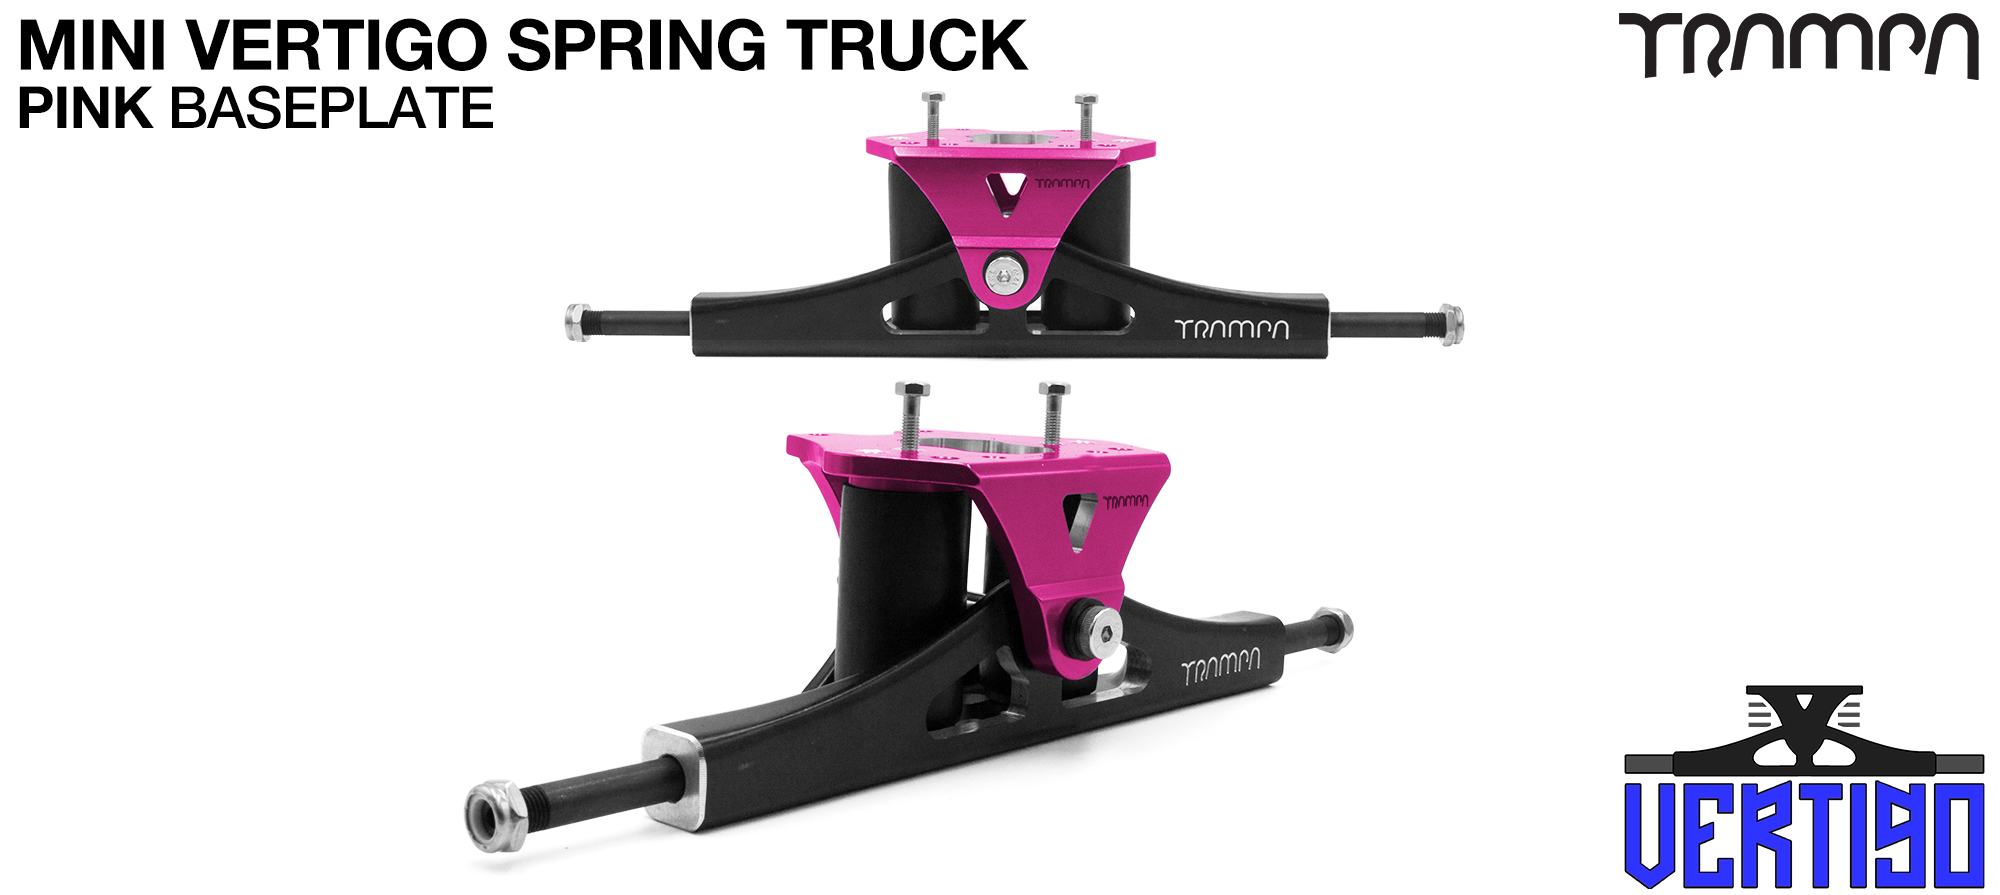 Mini VERTIGO TRAMPA TRUCKS - CNC FORGED Channel Hanger with 9.525mm HOLLOW Steel Axle CNC Baseplate Stainless Steel Kingpin - PINK